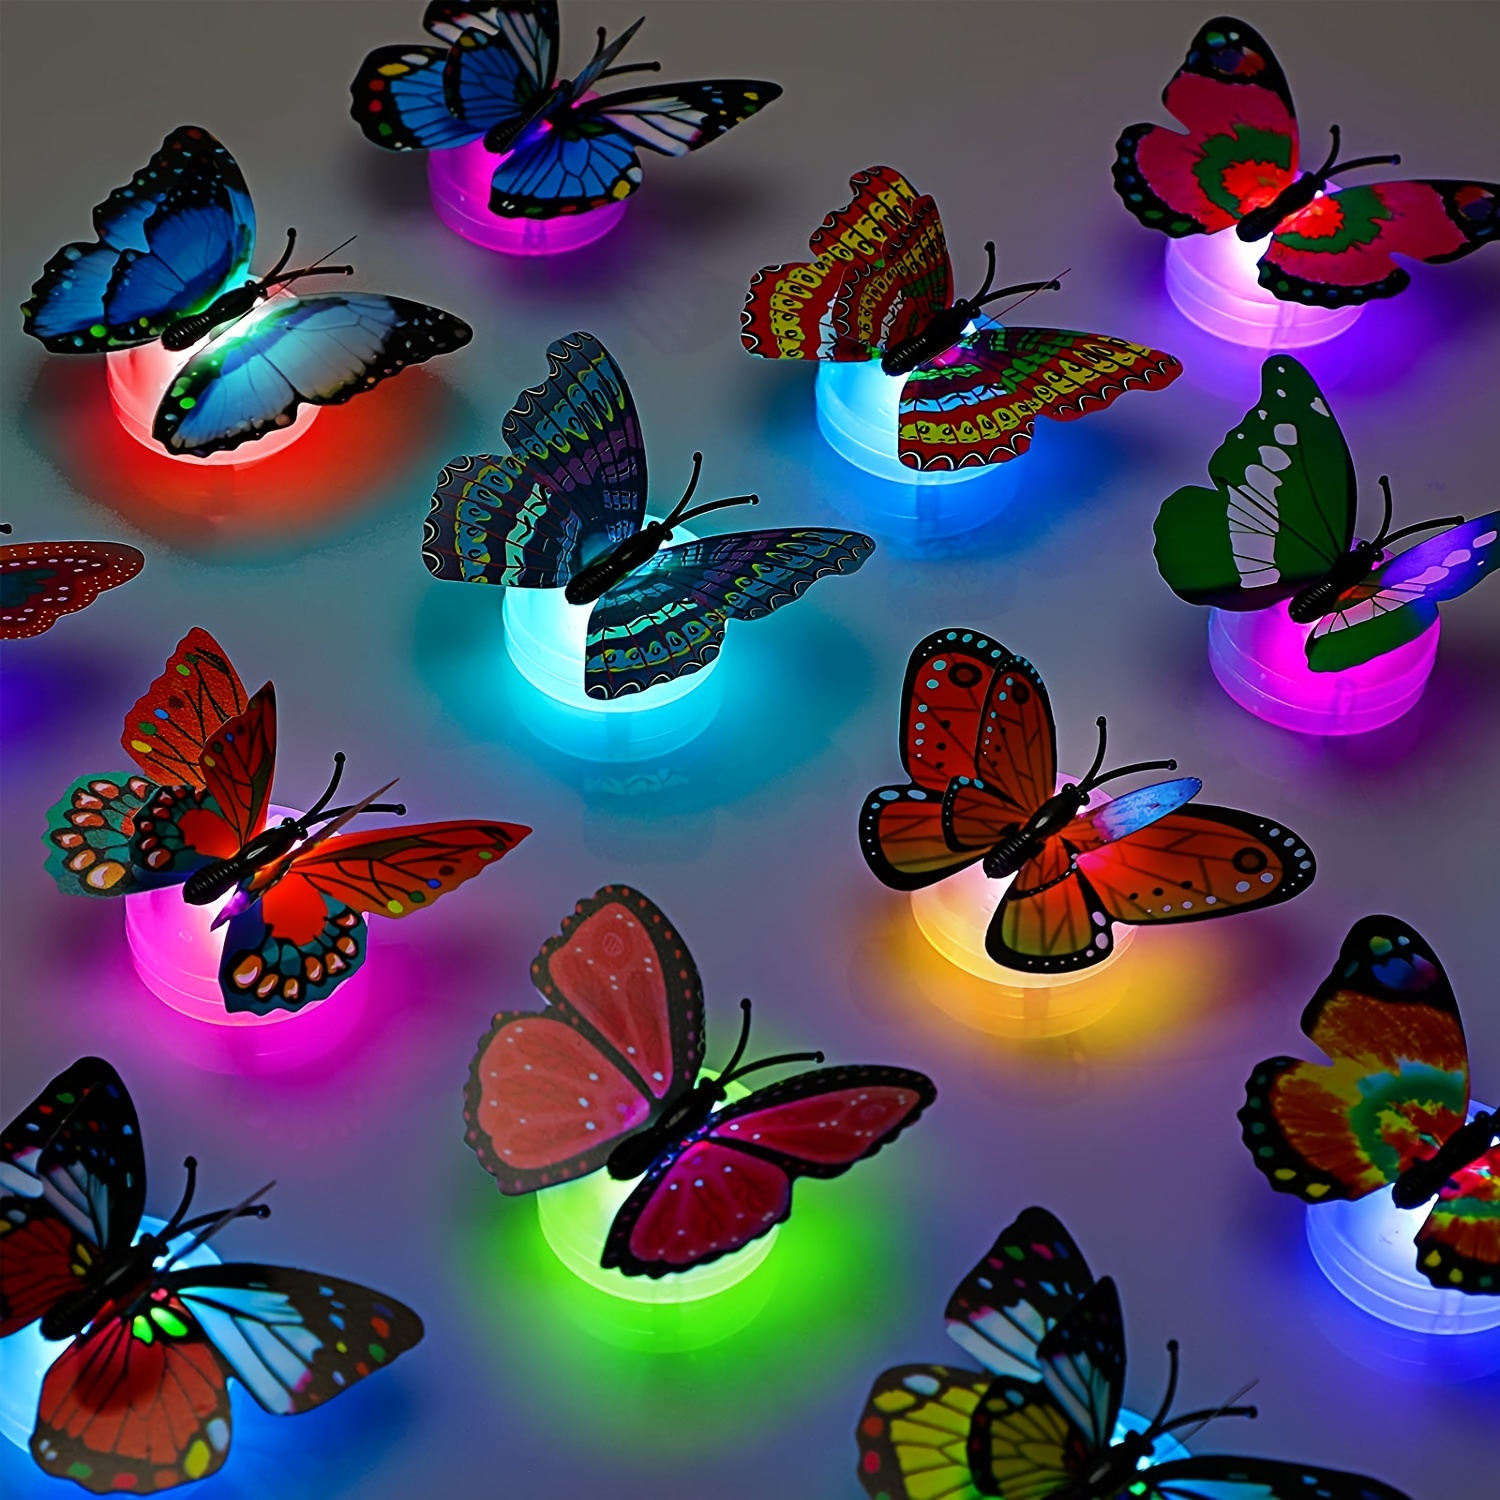 

24pcs, 3d Led Butterfly Decoration Night Light Sticker Single And Double Wall Light For Garden Backyard Lawn Party Festive Party Nursery Bedroom Living Room